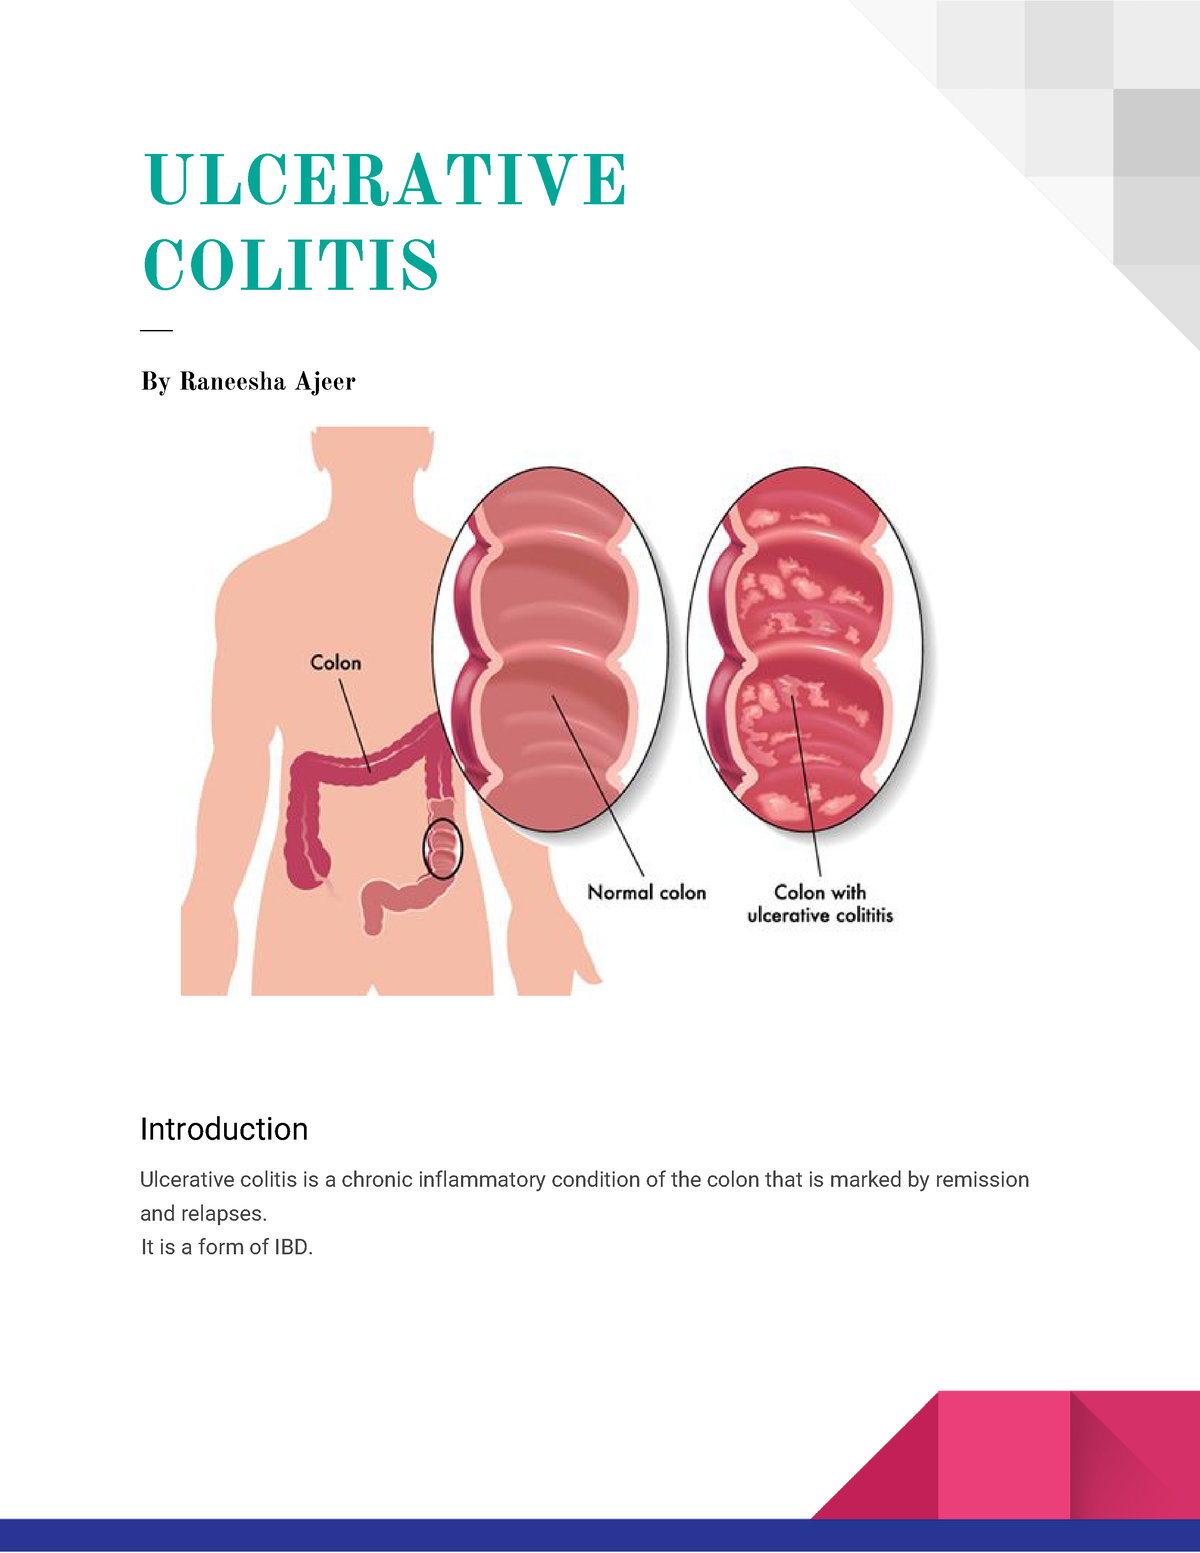 Ulcerative colitis is a chronic inflammatory condition of the